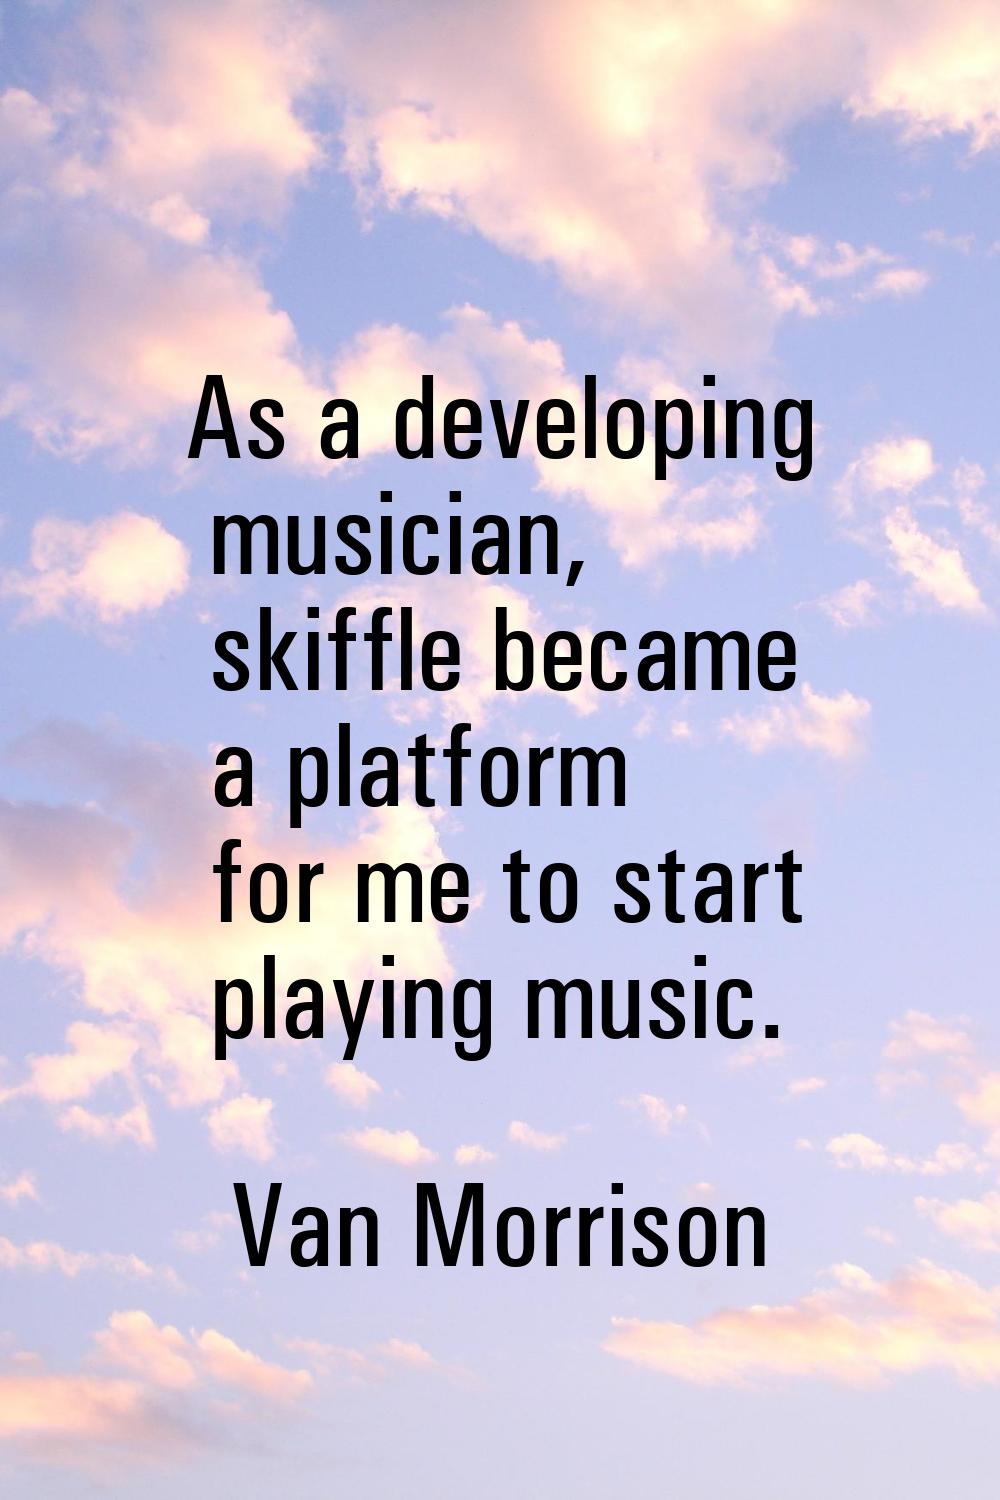 As a developing musician, skiffle became a platform for me to start playing music.